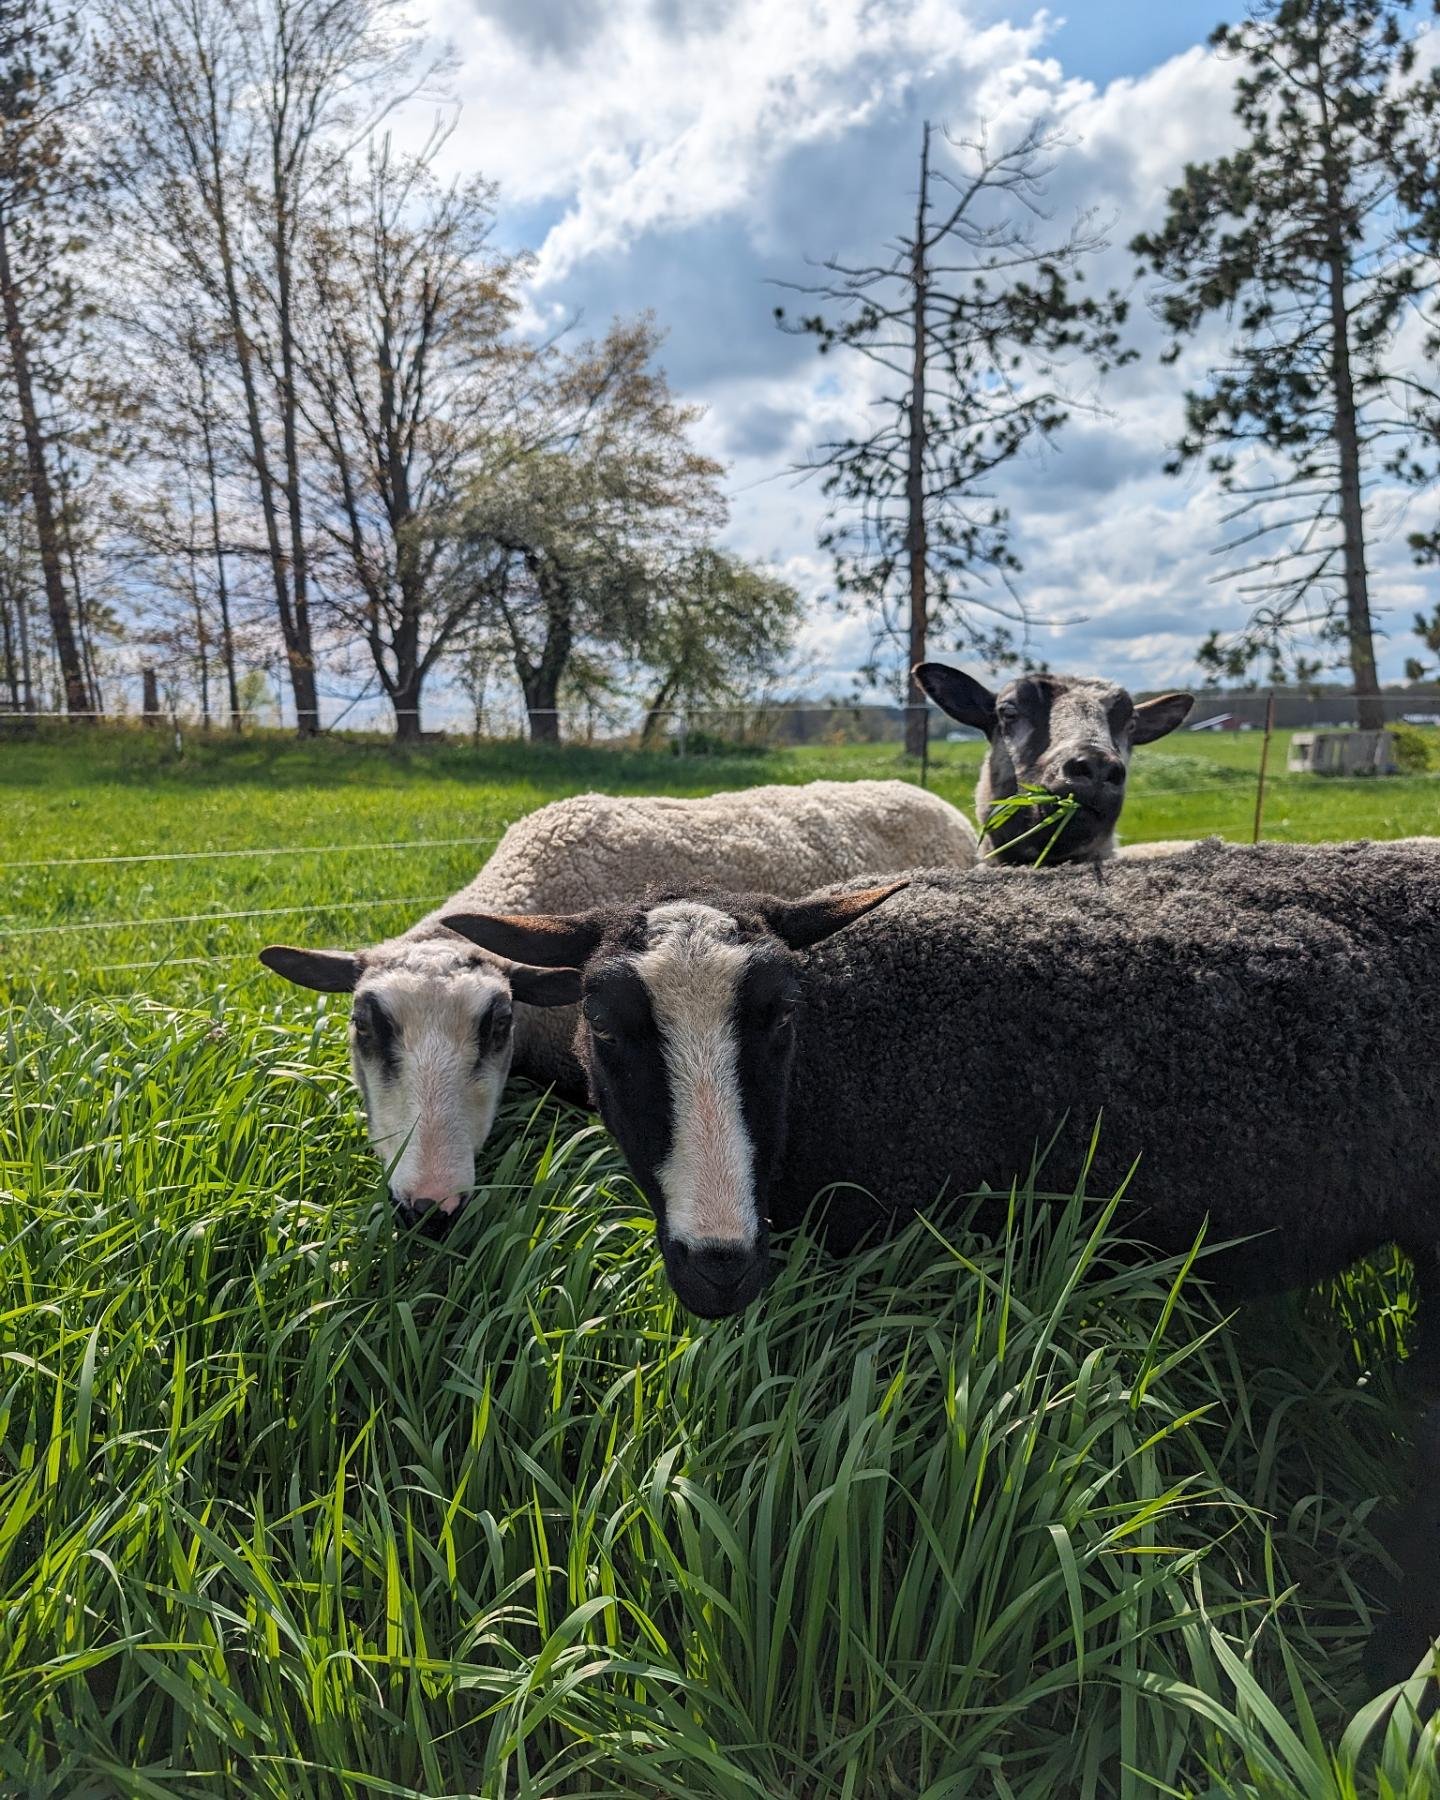 The flock is enjoying the yard this weekend since the grass is growing so quickly. Hey, it's all pasture if there's a fence around it, right? They get fed and we don't have to mow!